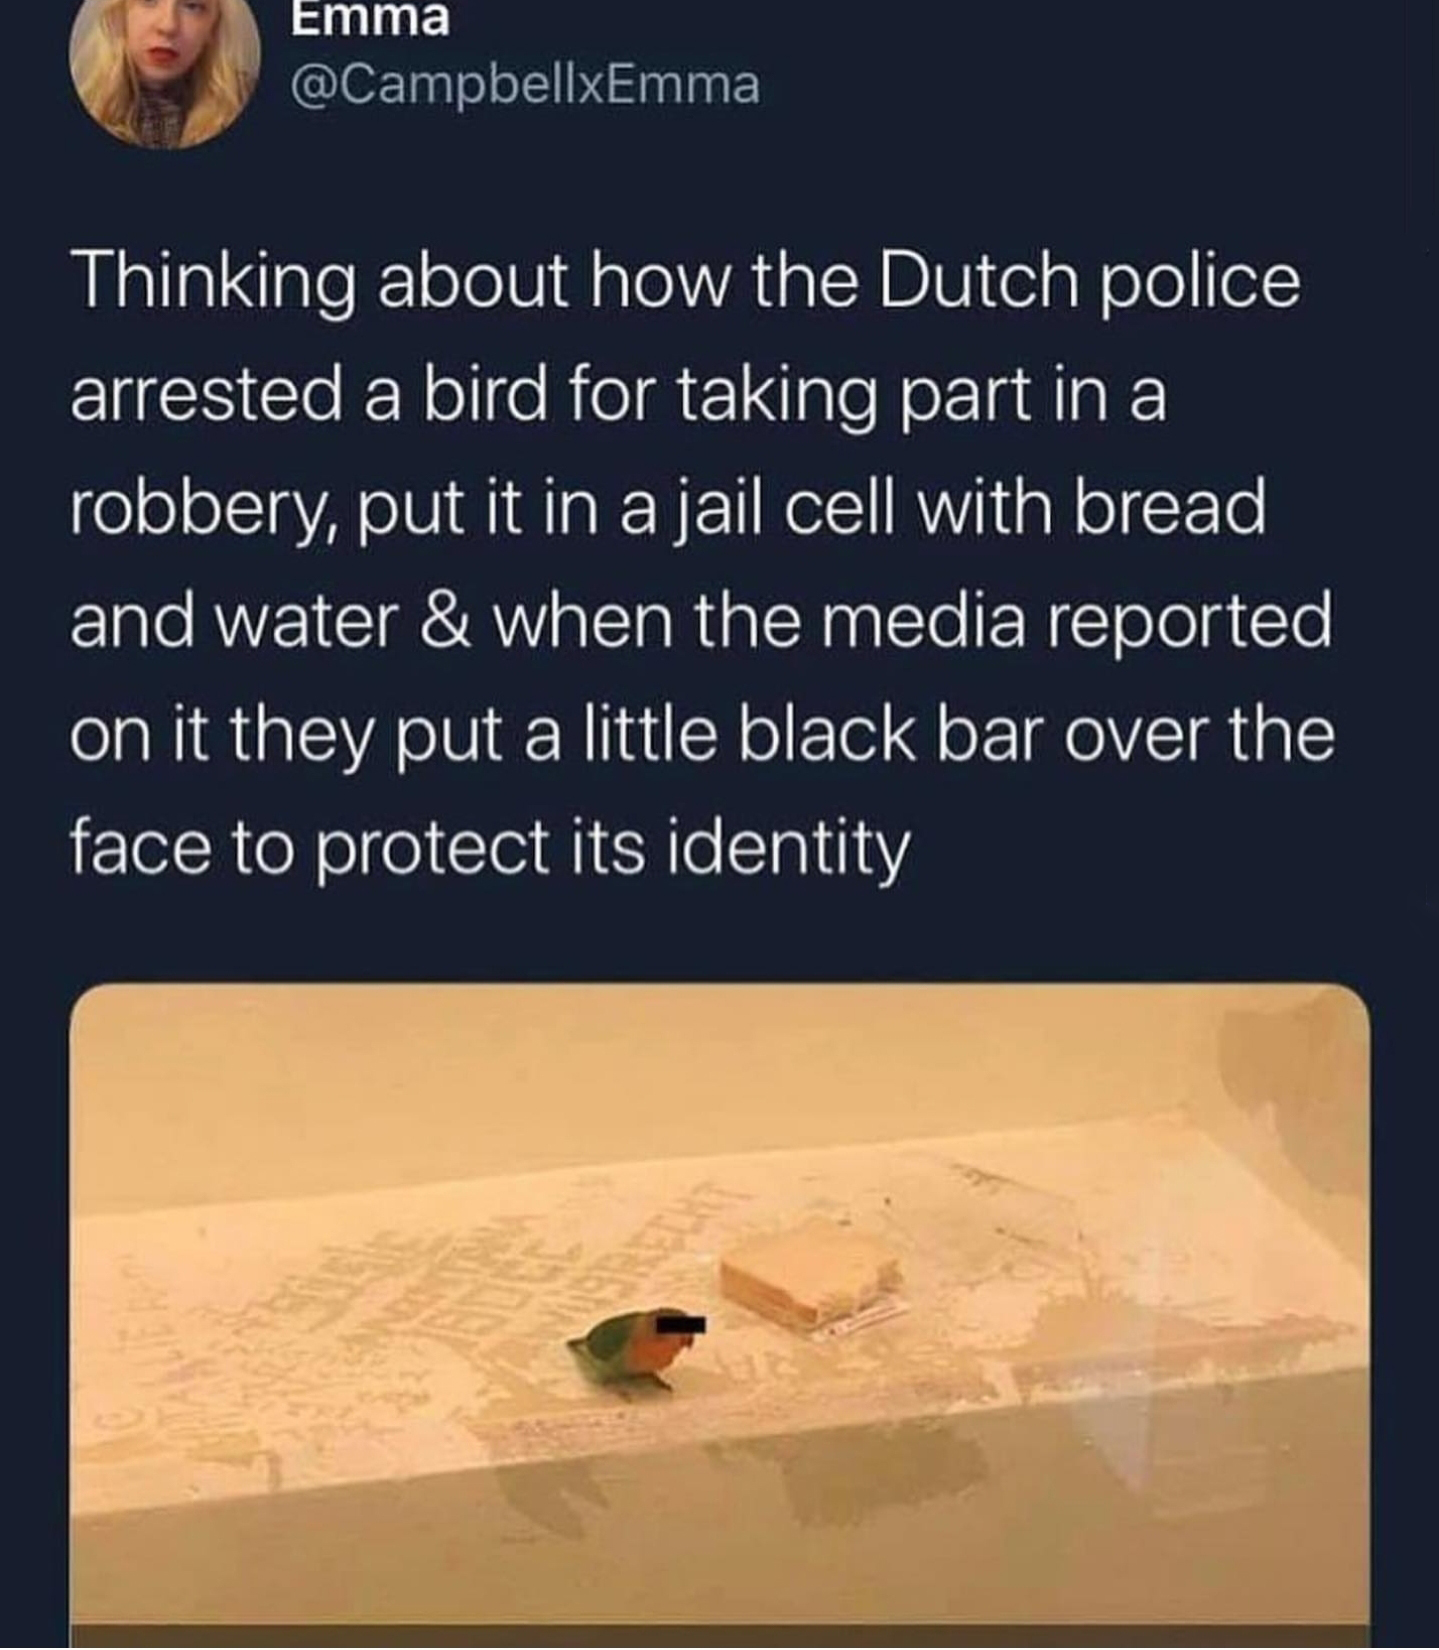 material - Emma Thinking about how the Dutch police, arrested a bird for taking part in a robbery, put it in a jail cell with bread and water & when the media reported on it they put a little black bar over the face to protect its identity